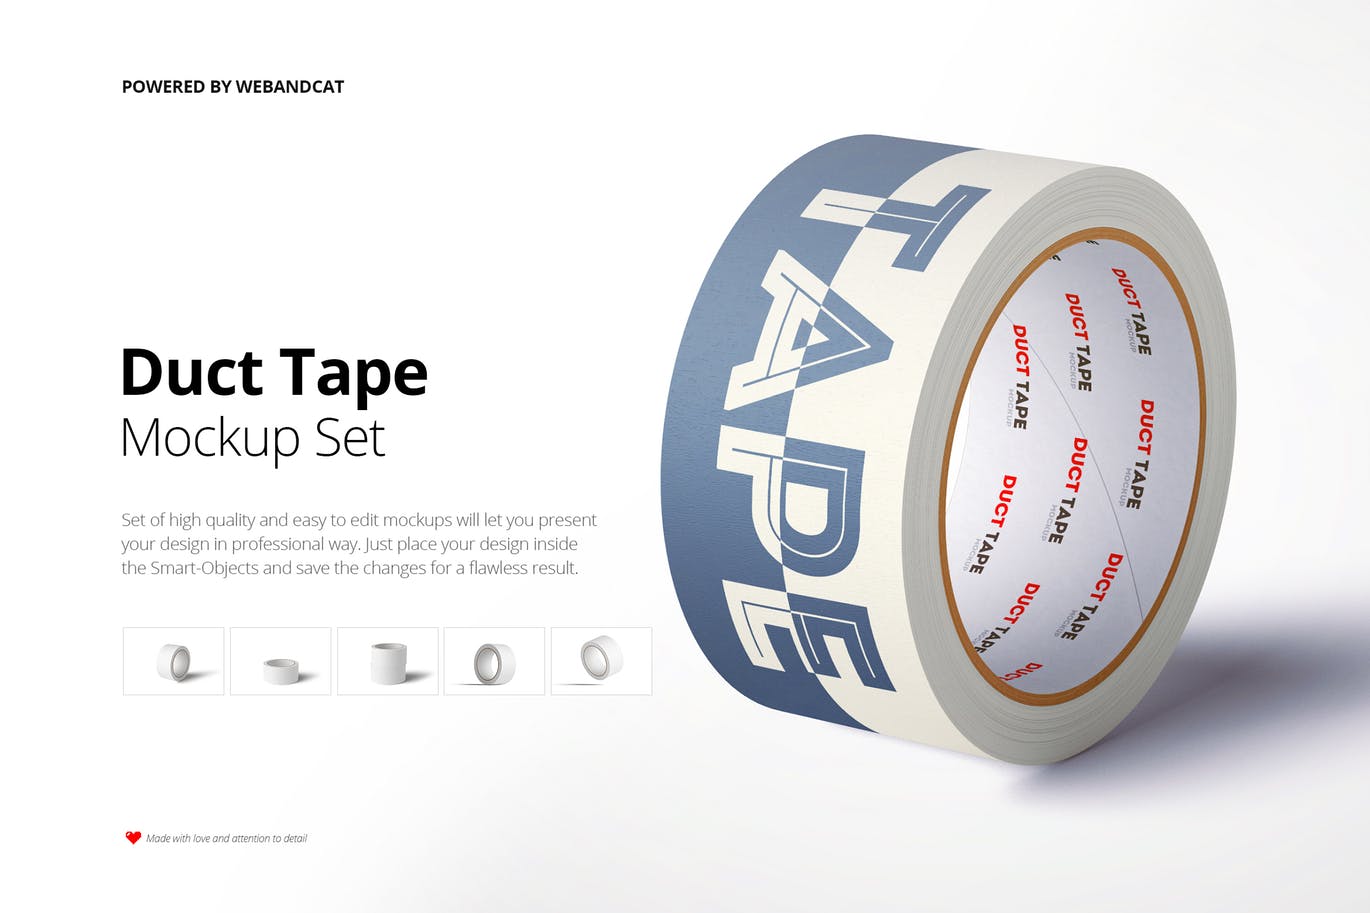 A set of duct tape mockup templates